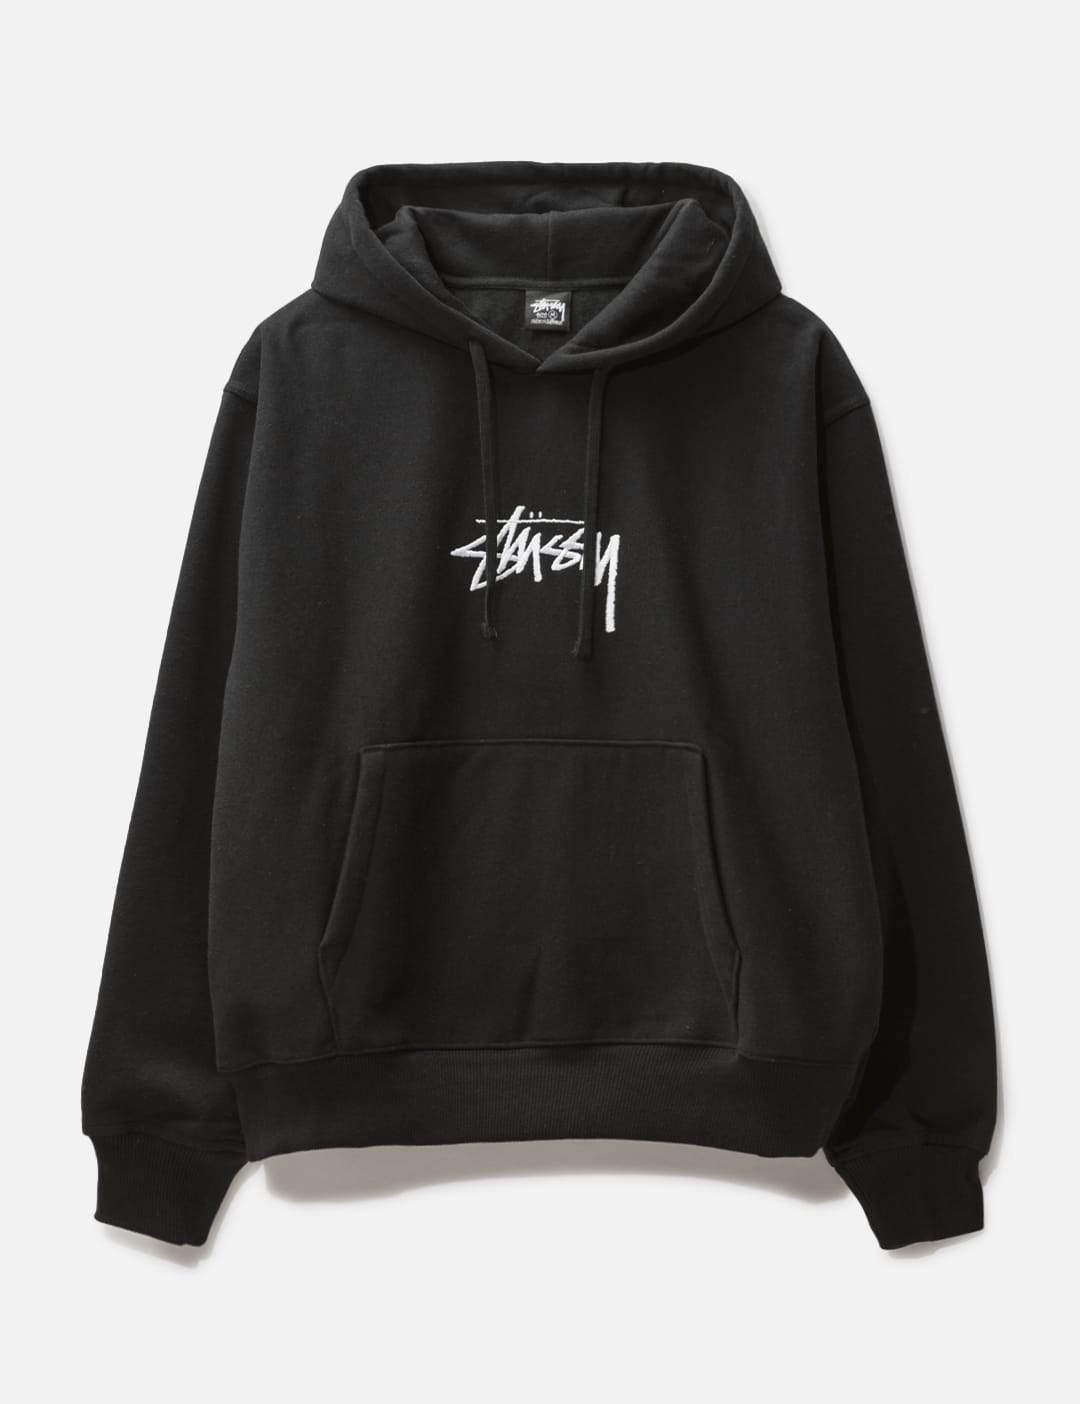 Stüssy - Stock Logo Hoodie | HBX - Globally Curated Fashion and